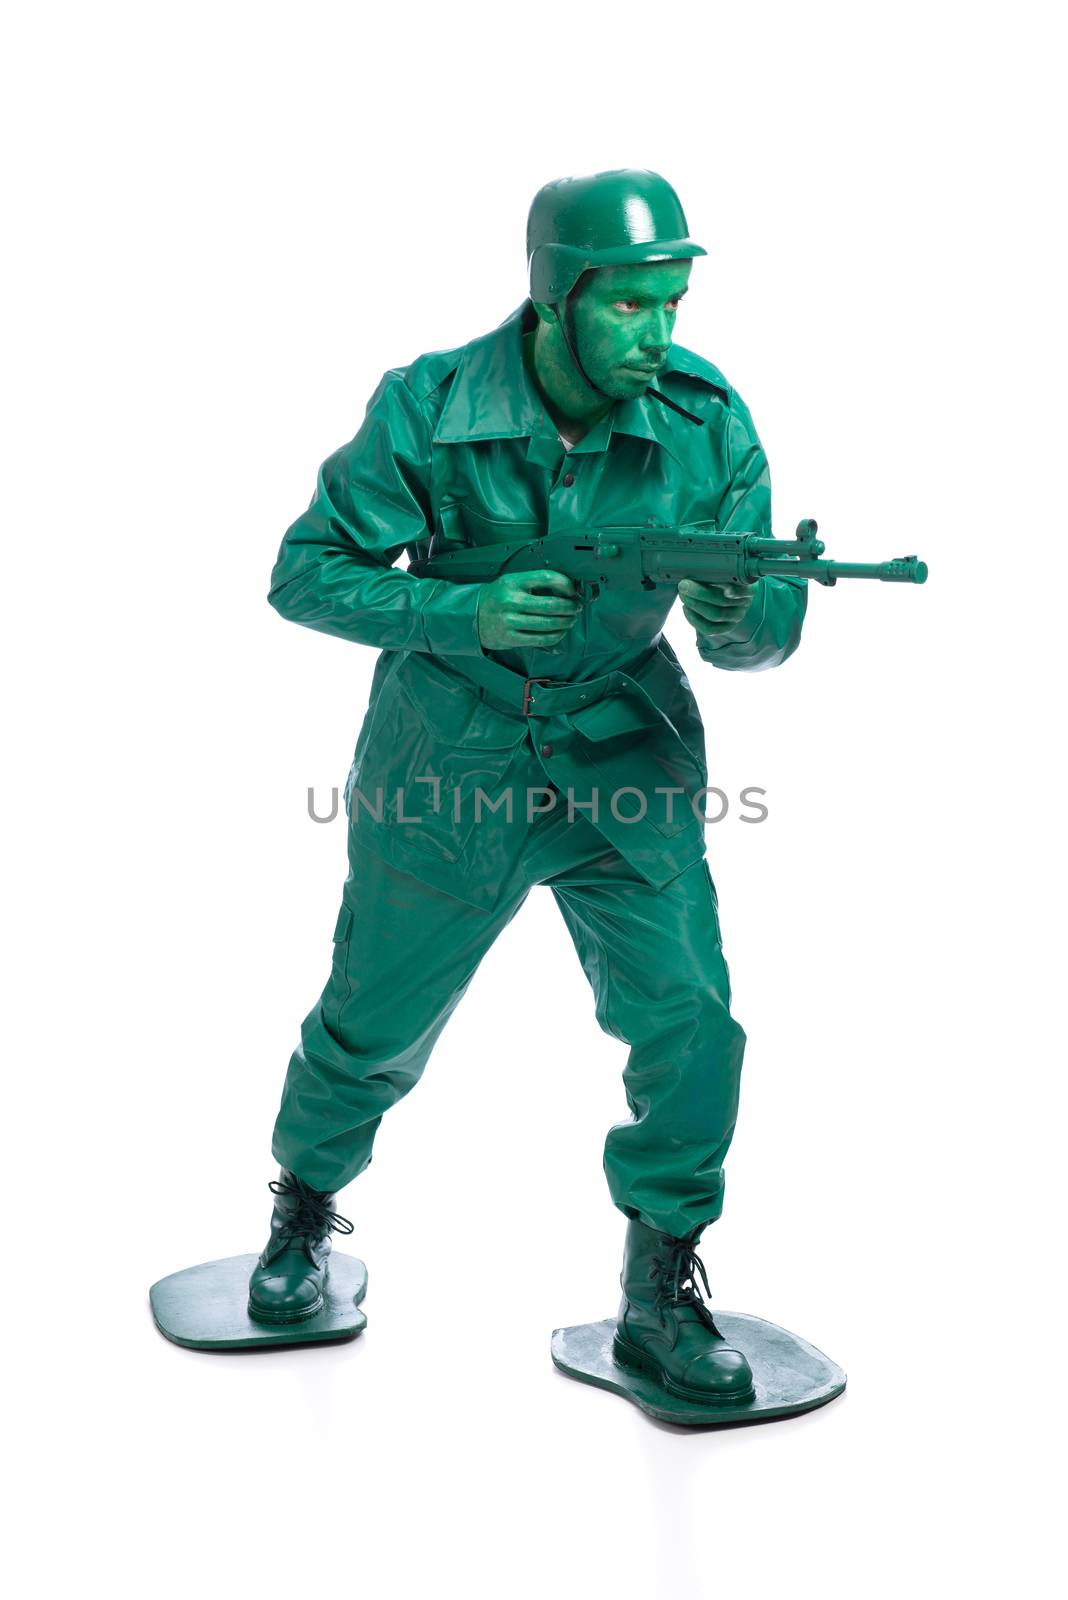 Man on a green toy soldier costume walking with riffle isolated on white background.